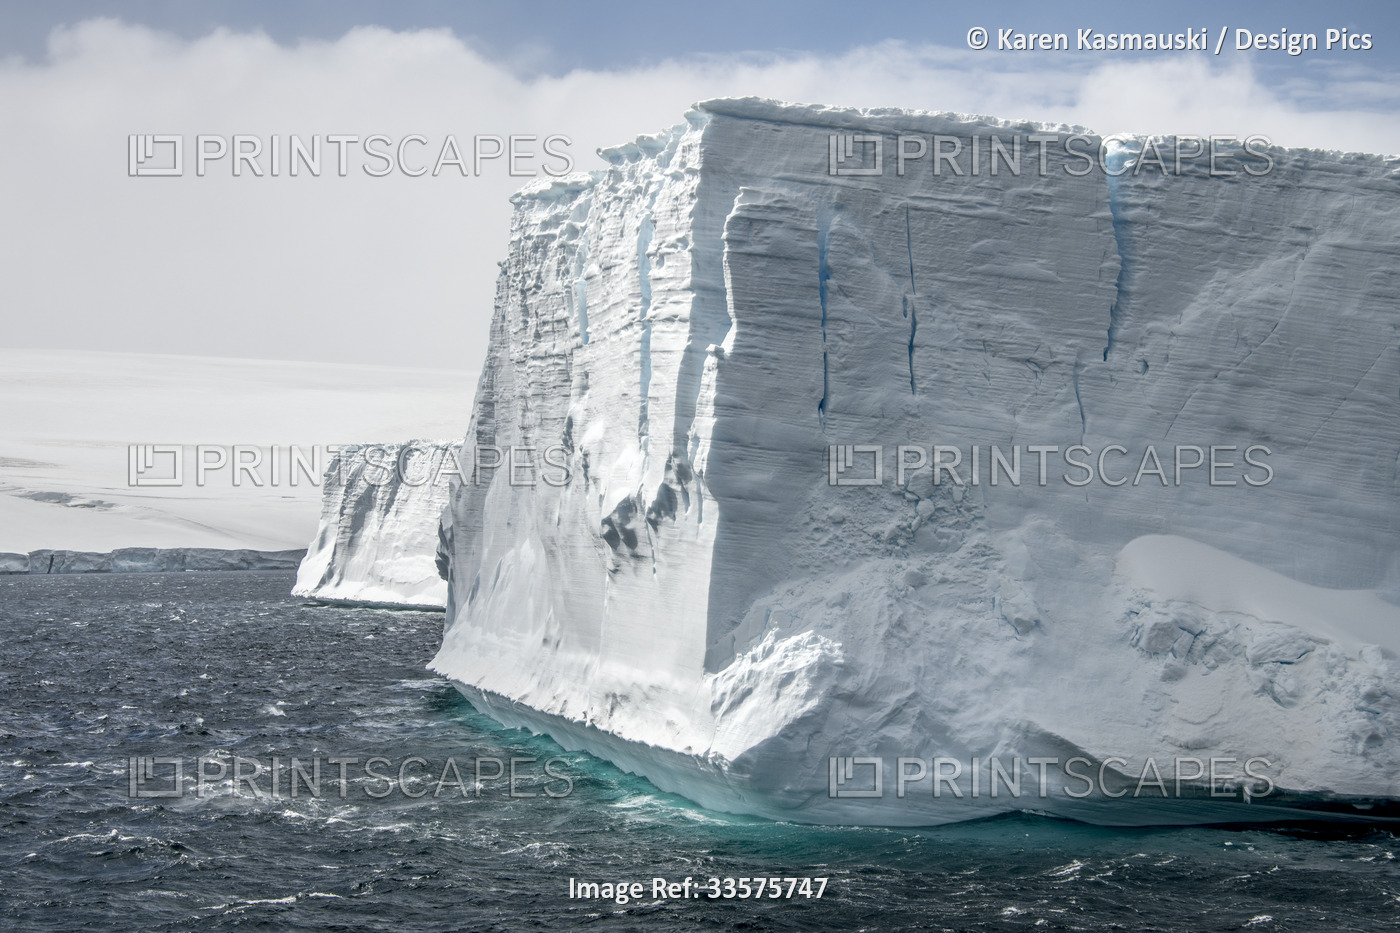 Giant icebergs in Antarctica's Weddell Sea. The sea's land boundaries are ...